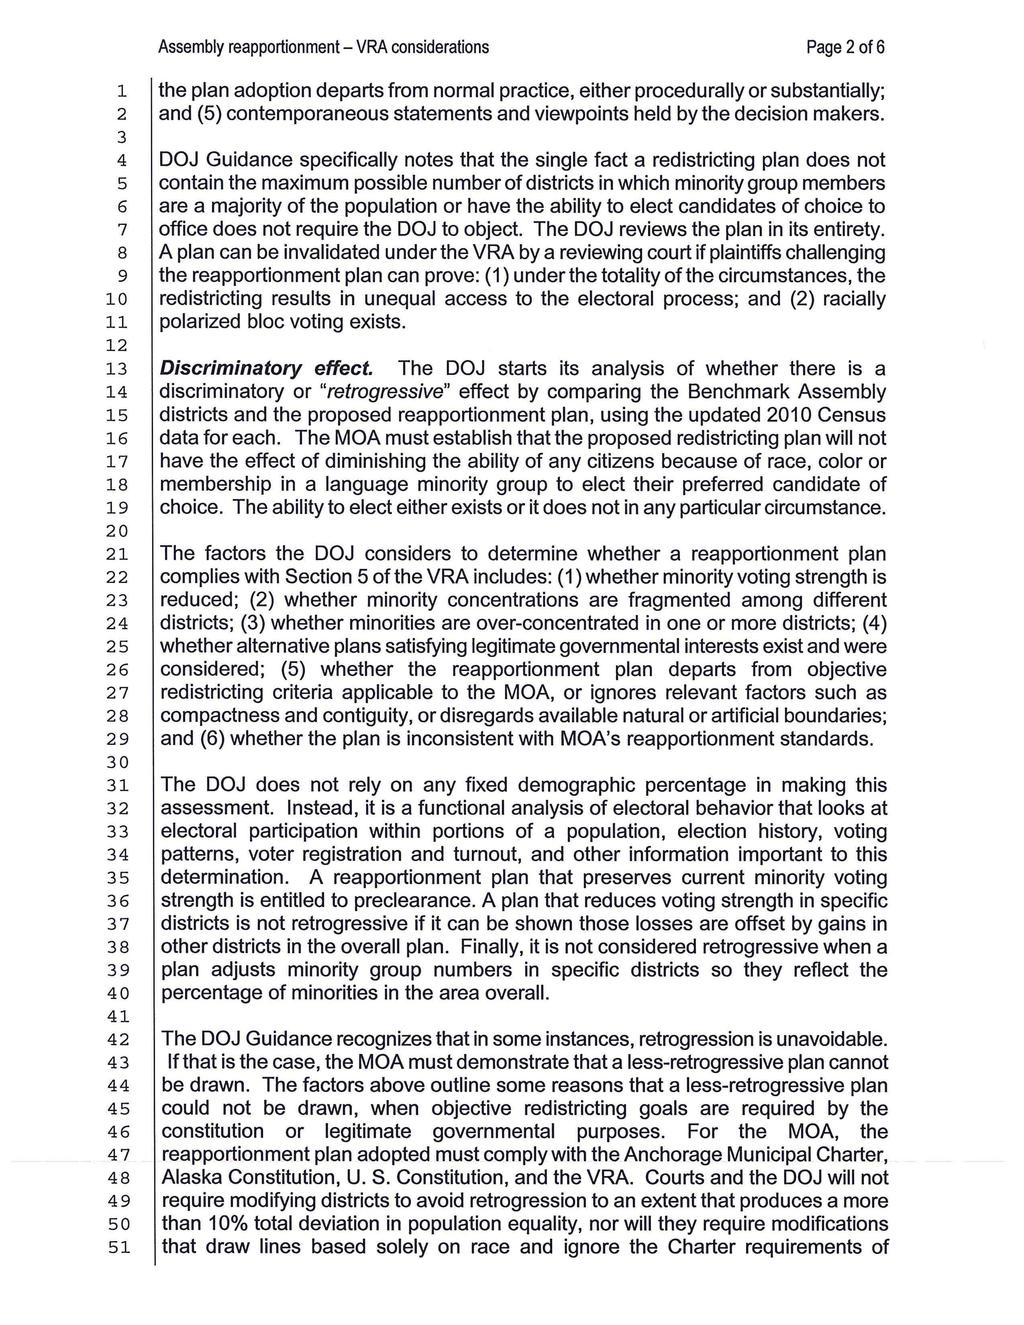 Page 2of6 1 the plan adoption departs from normal practice, either procedurally or substantially; 2 and (5) contemporaneous statements and viewpoints held by the decision makers.